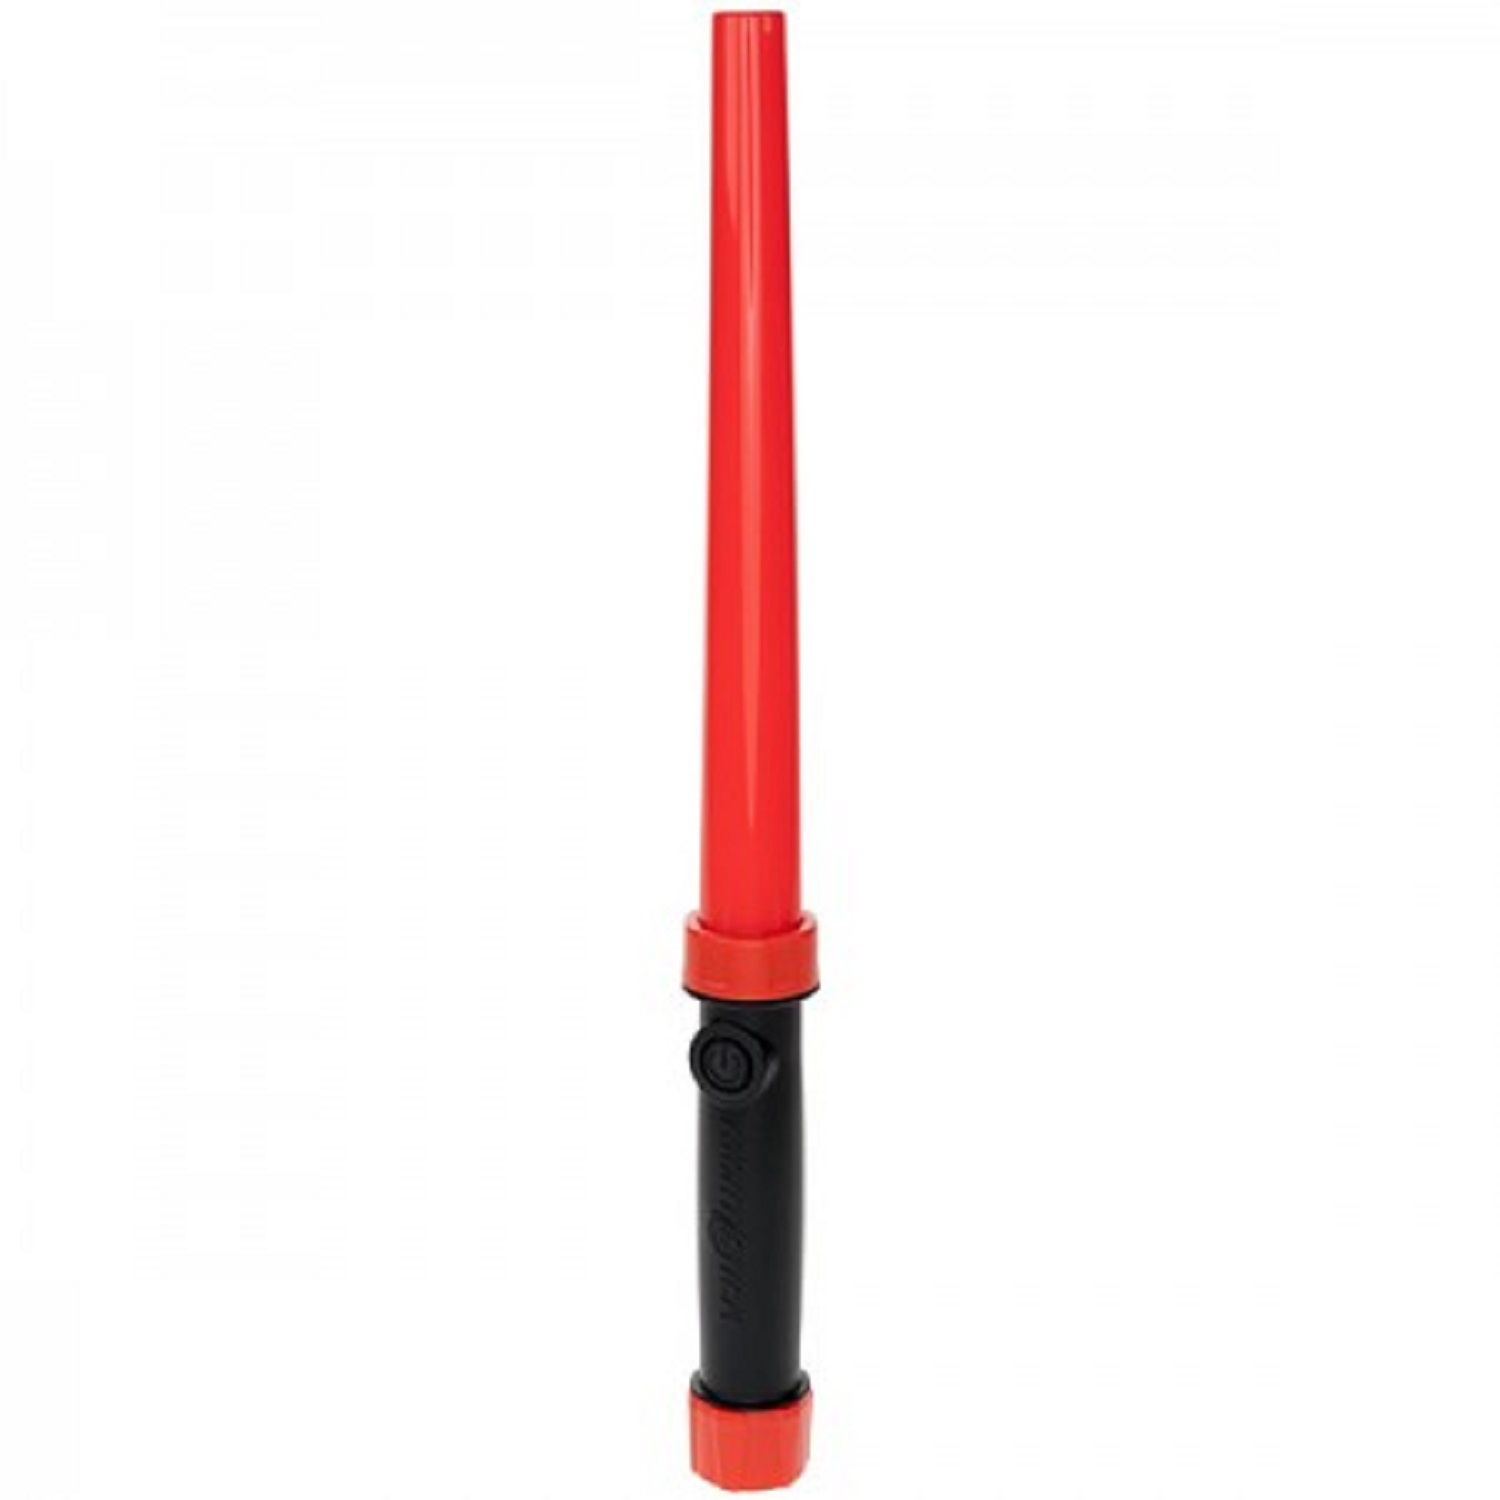 Nightstick LED Traffic Wand Red | 017398805018